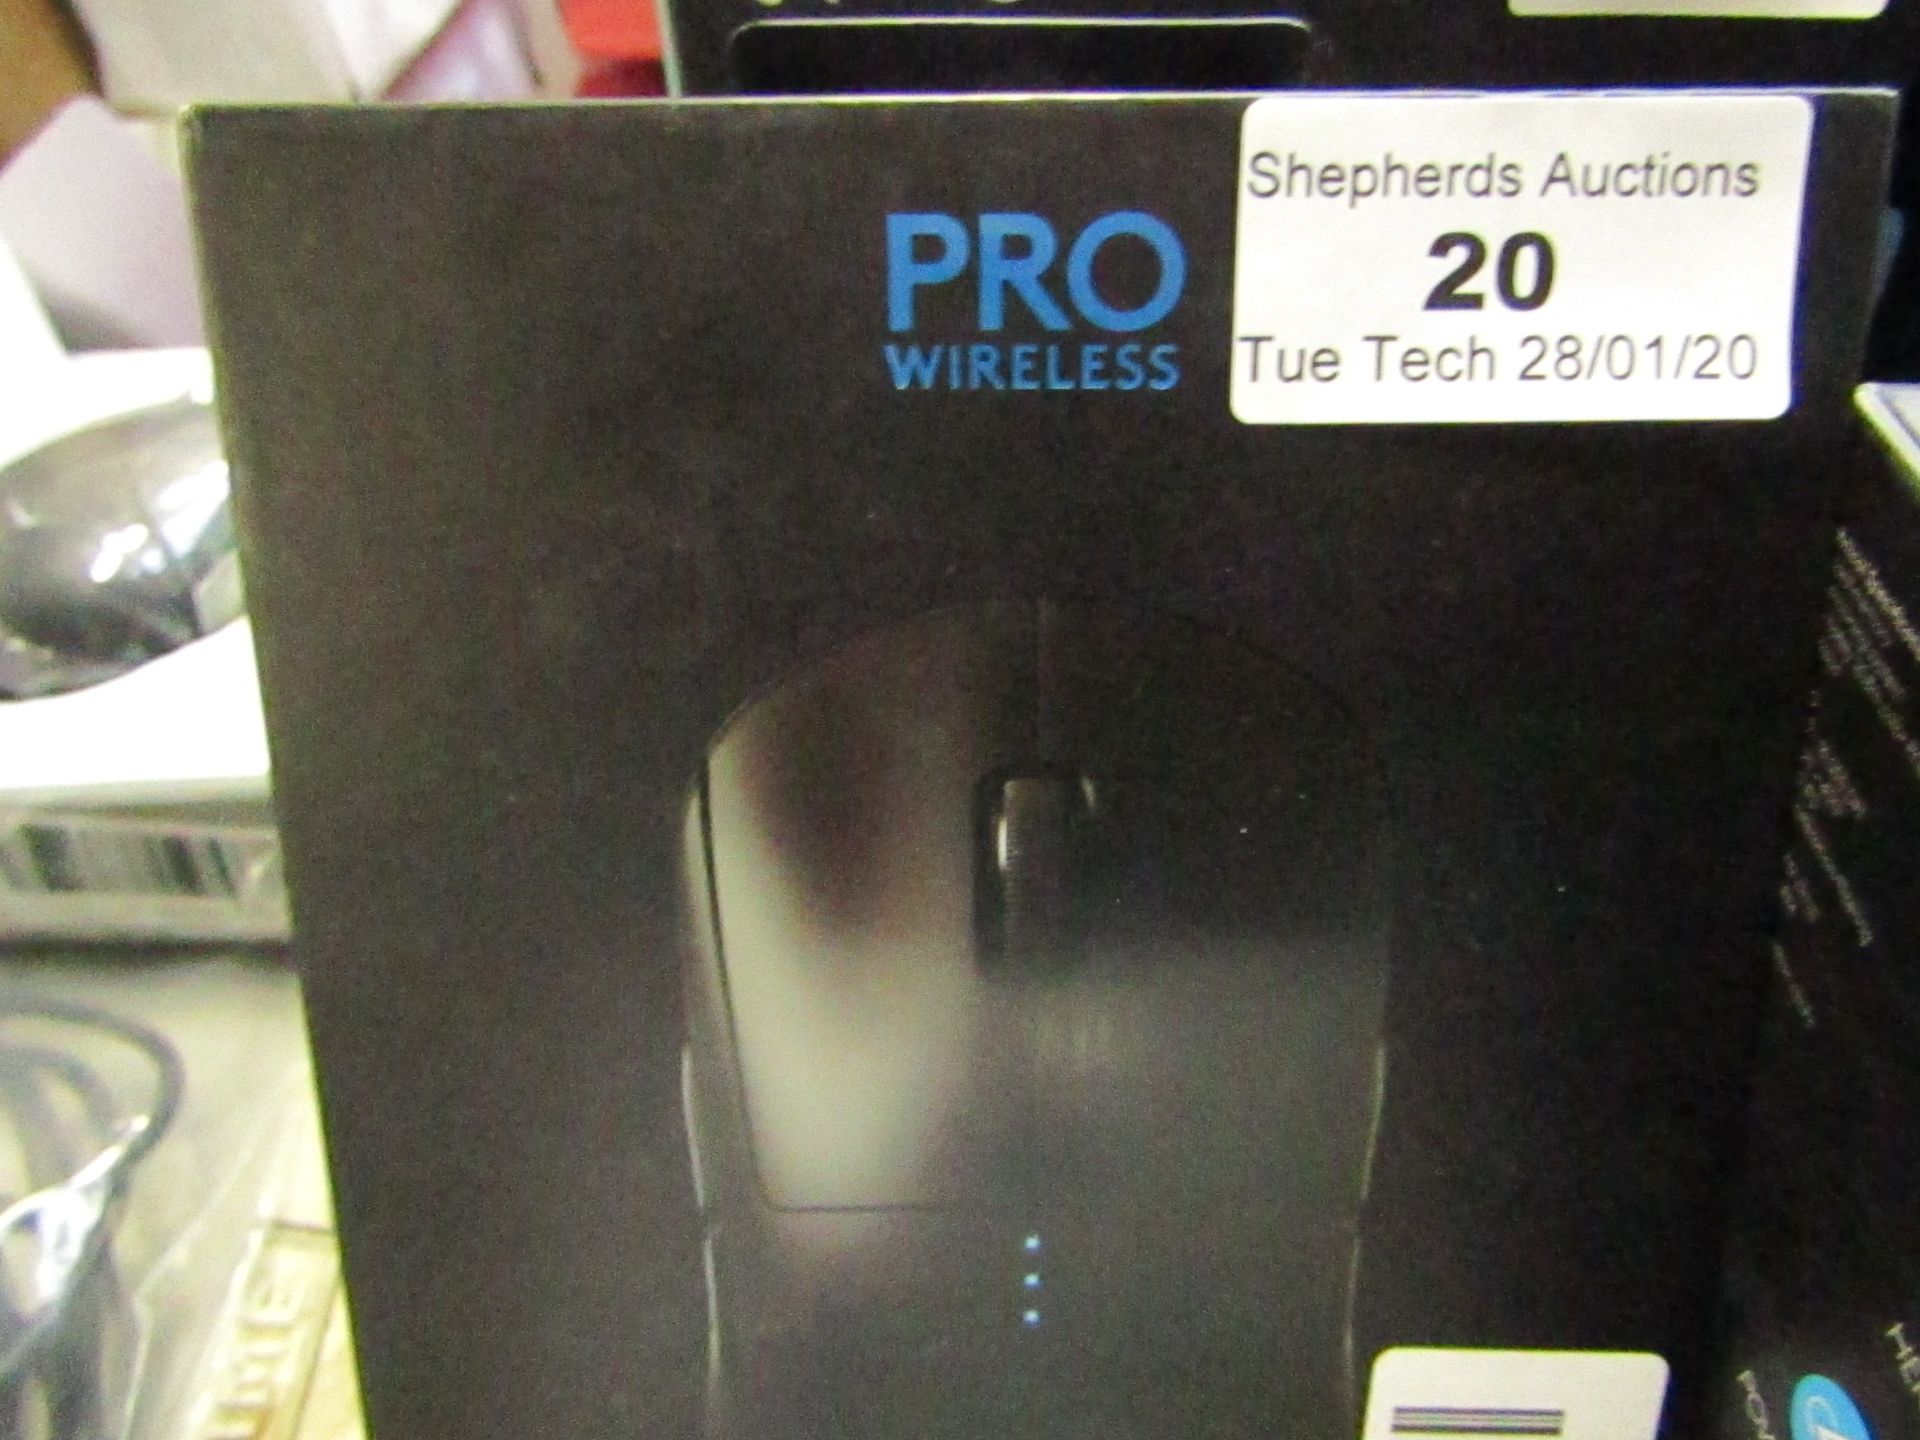 Logitech Pro wireless gaming mouse, untested and boxed. RRP £129.99